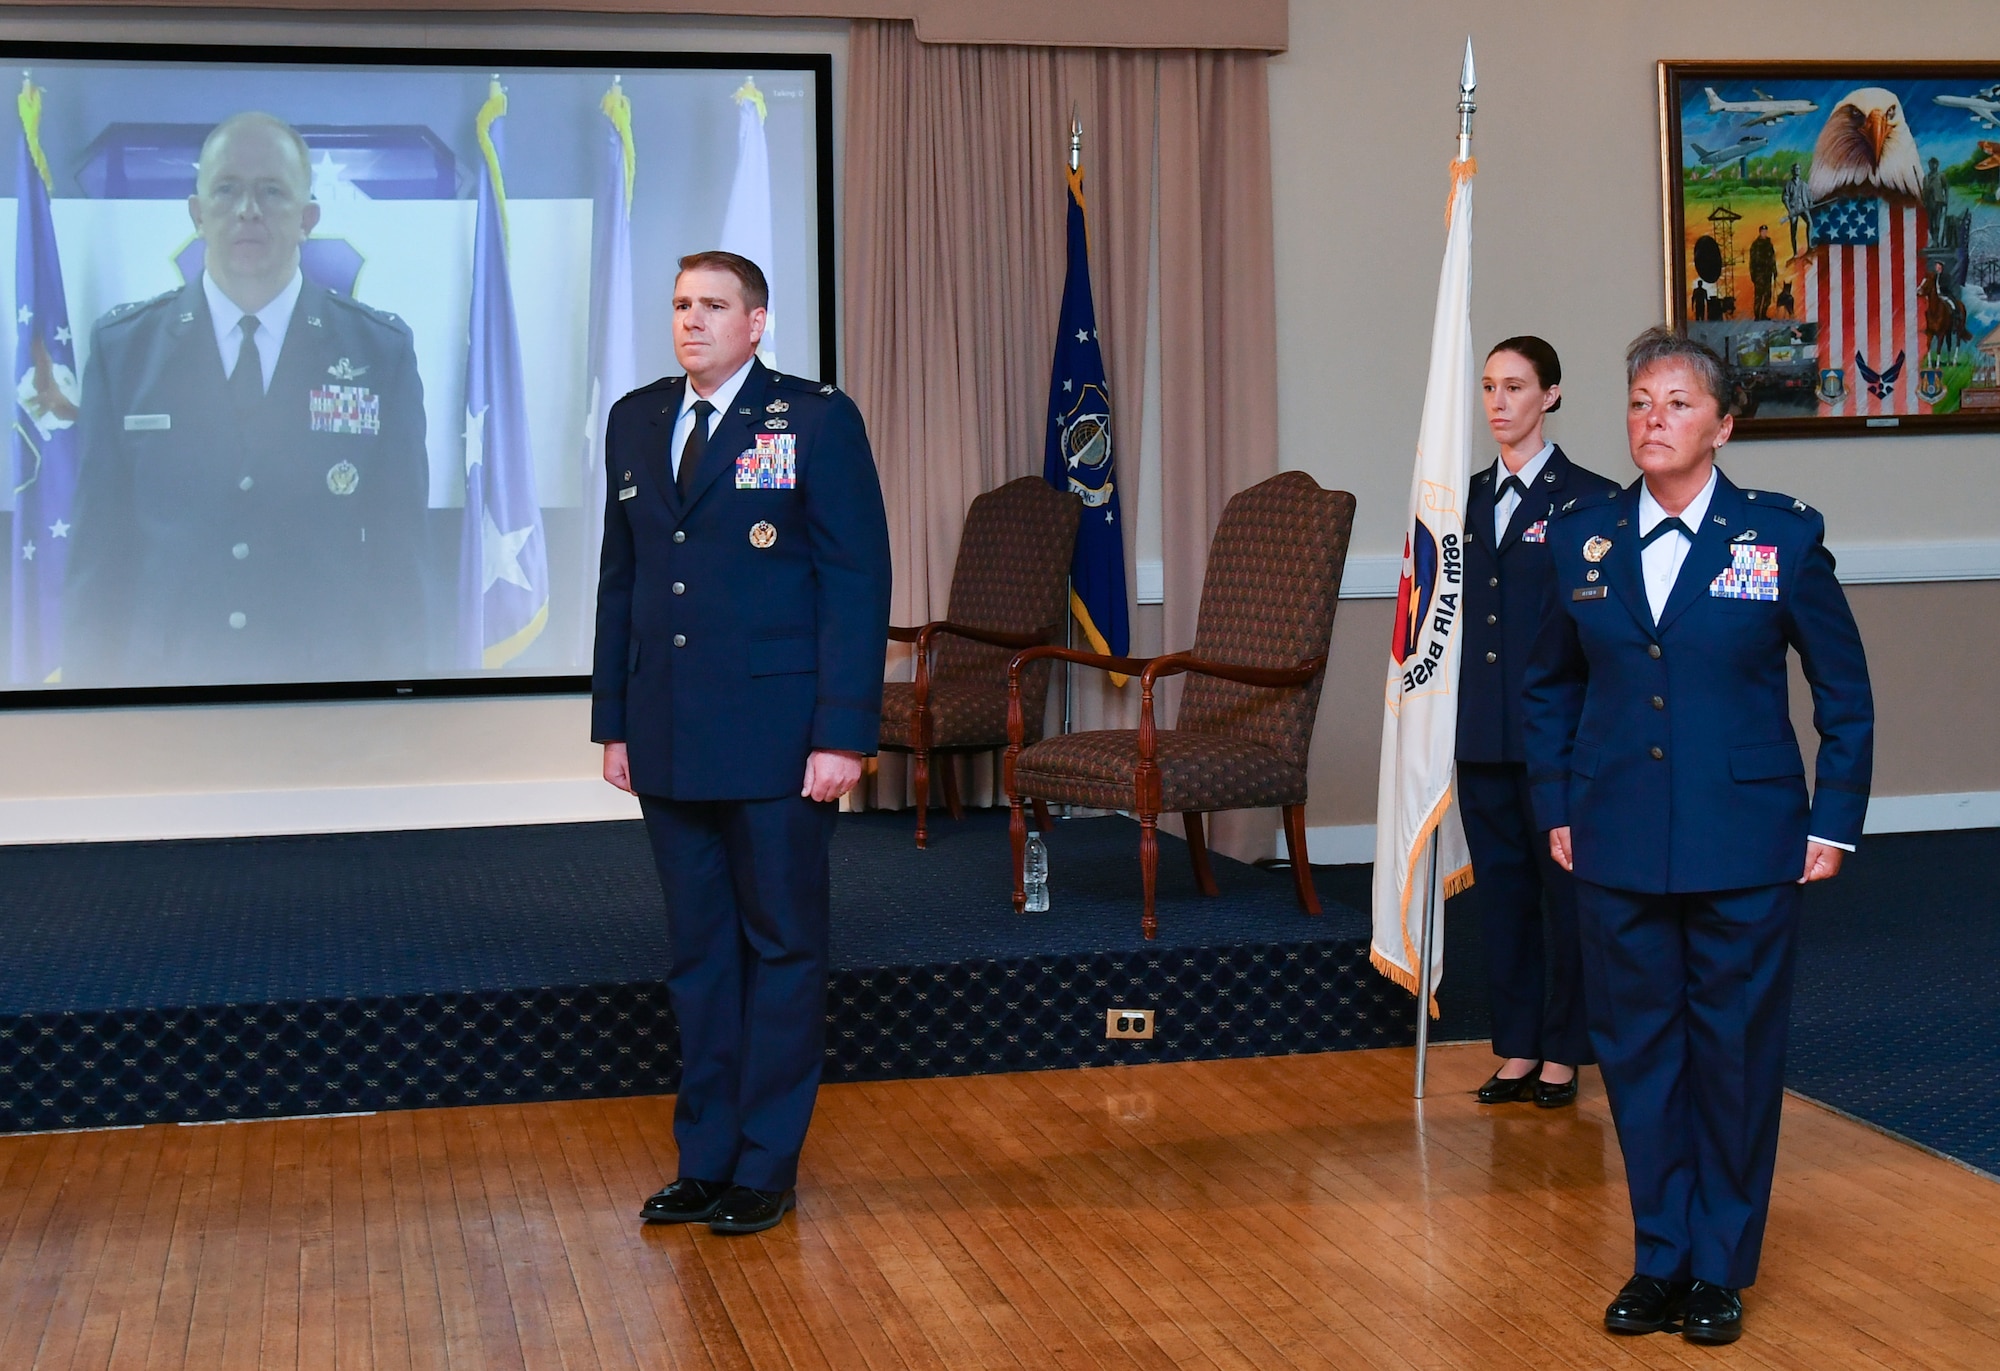 Col. Katrina Stephens stands at attention next to Col. Chad Ellsworth during the 66th Air Base Group change of command ceremony at Hanscom Air Force Base, Mass., while Lt. Gen. Robert McMurry, Air Force Life Cycle Management Center commander, looks on via teleconference. Stephens is taking command of the group after serving as the vice commander of the 78th Air Base Wing at Robins AFB, Ga., and is returning to Hanscom, where she served early in her Air Force career. (U.S. Air Force photo by Linda LaBonte Britt)